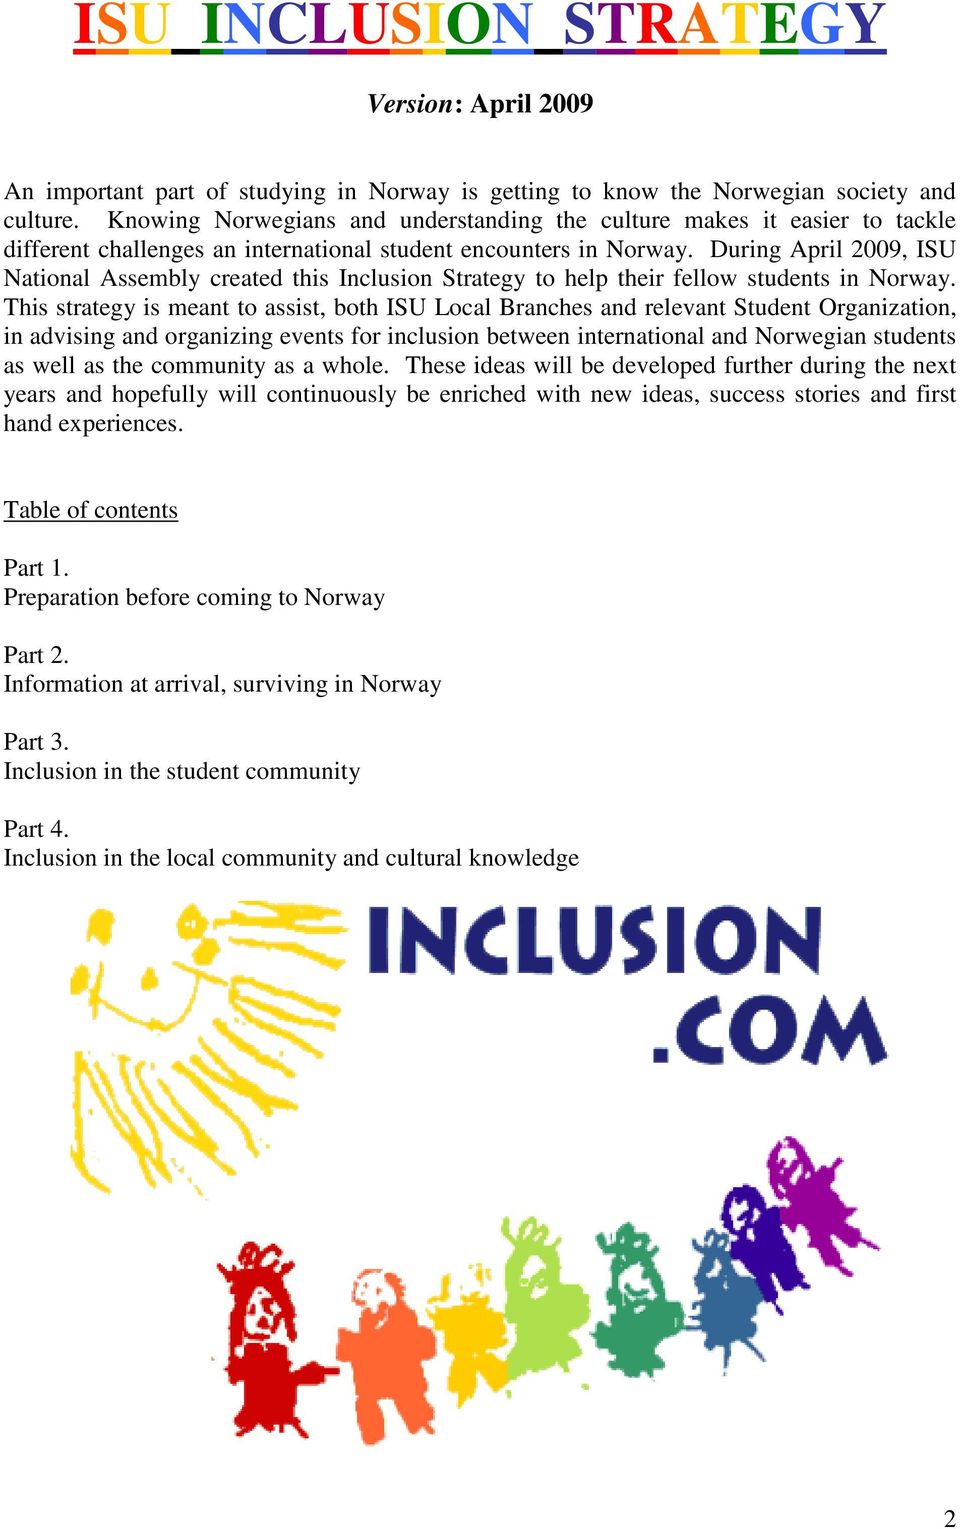 During April 2009, ISU National Assembly created this Inclusion Strategy to help their fellow students in Norway.